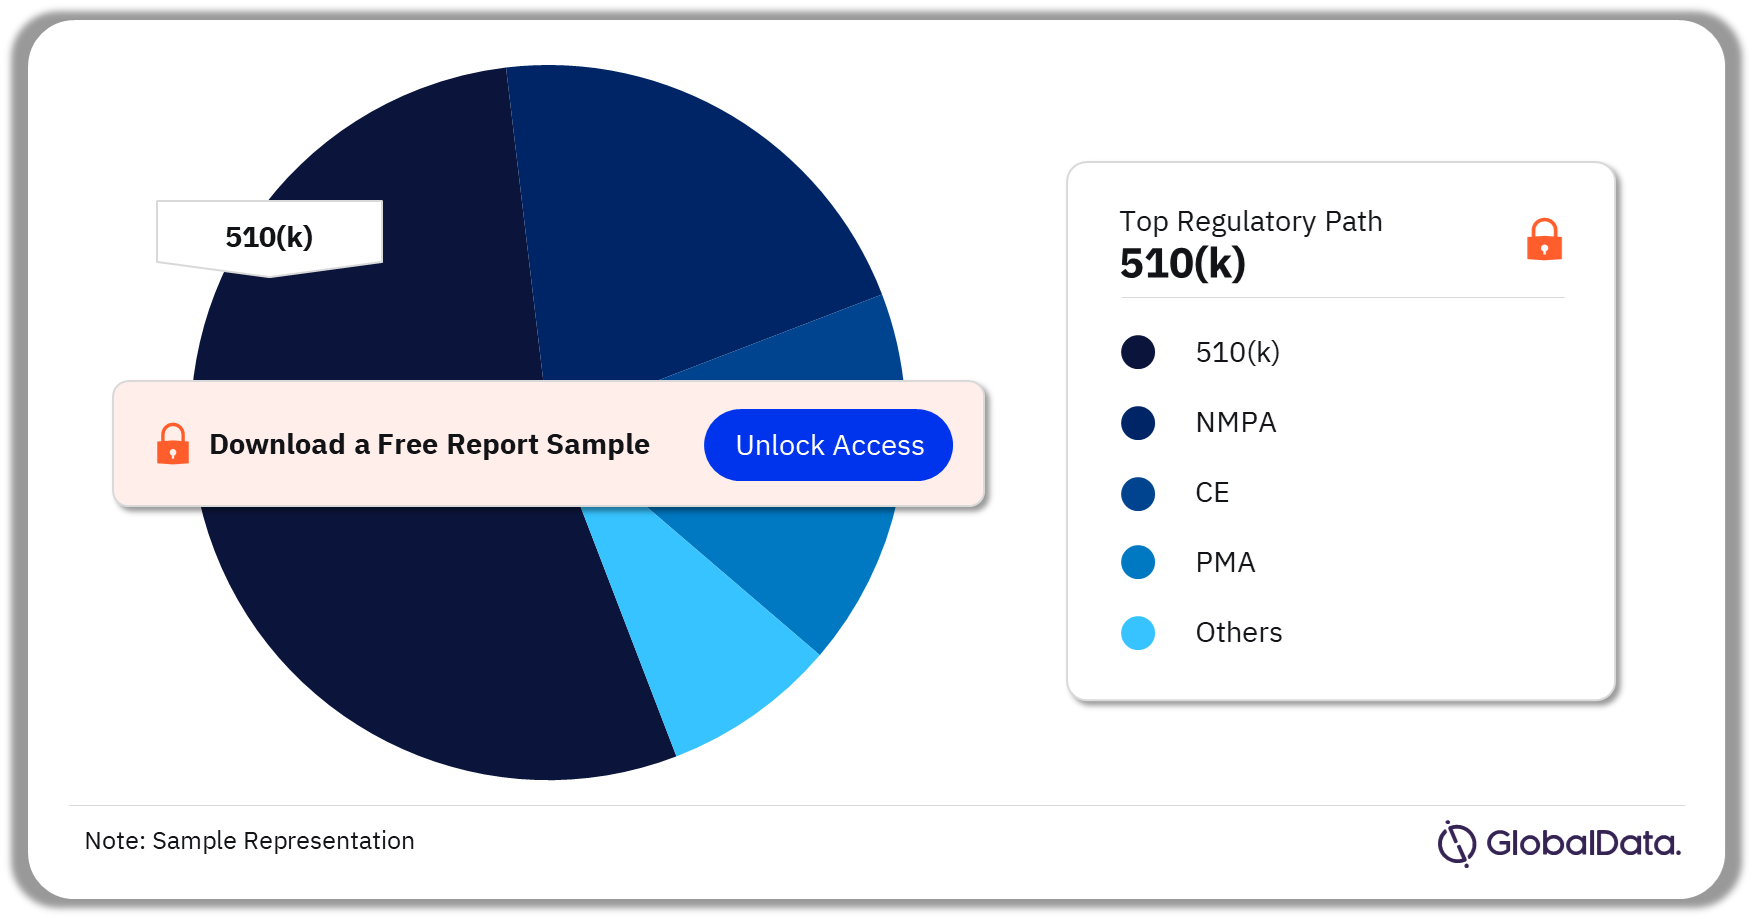 Knee Reconstruction Pipeline Market Analysis by Regulatory Paths, 2023 (%)